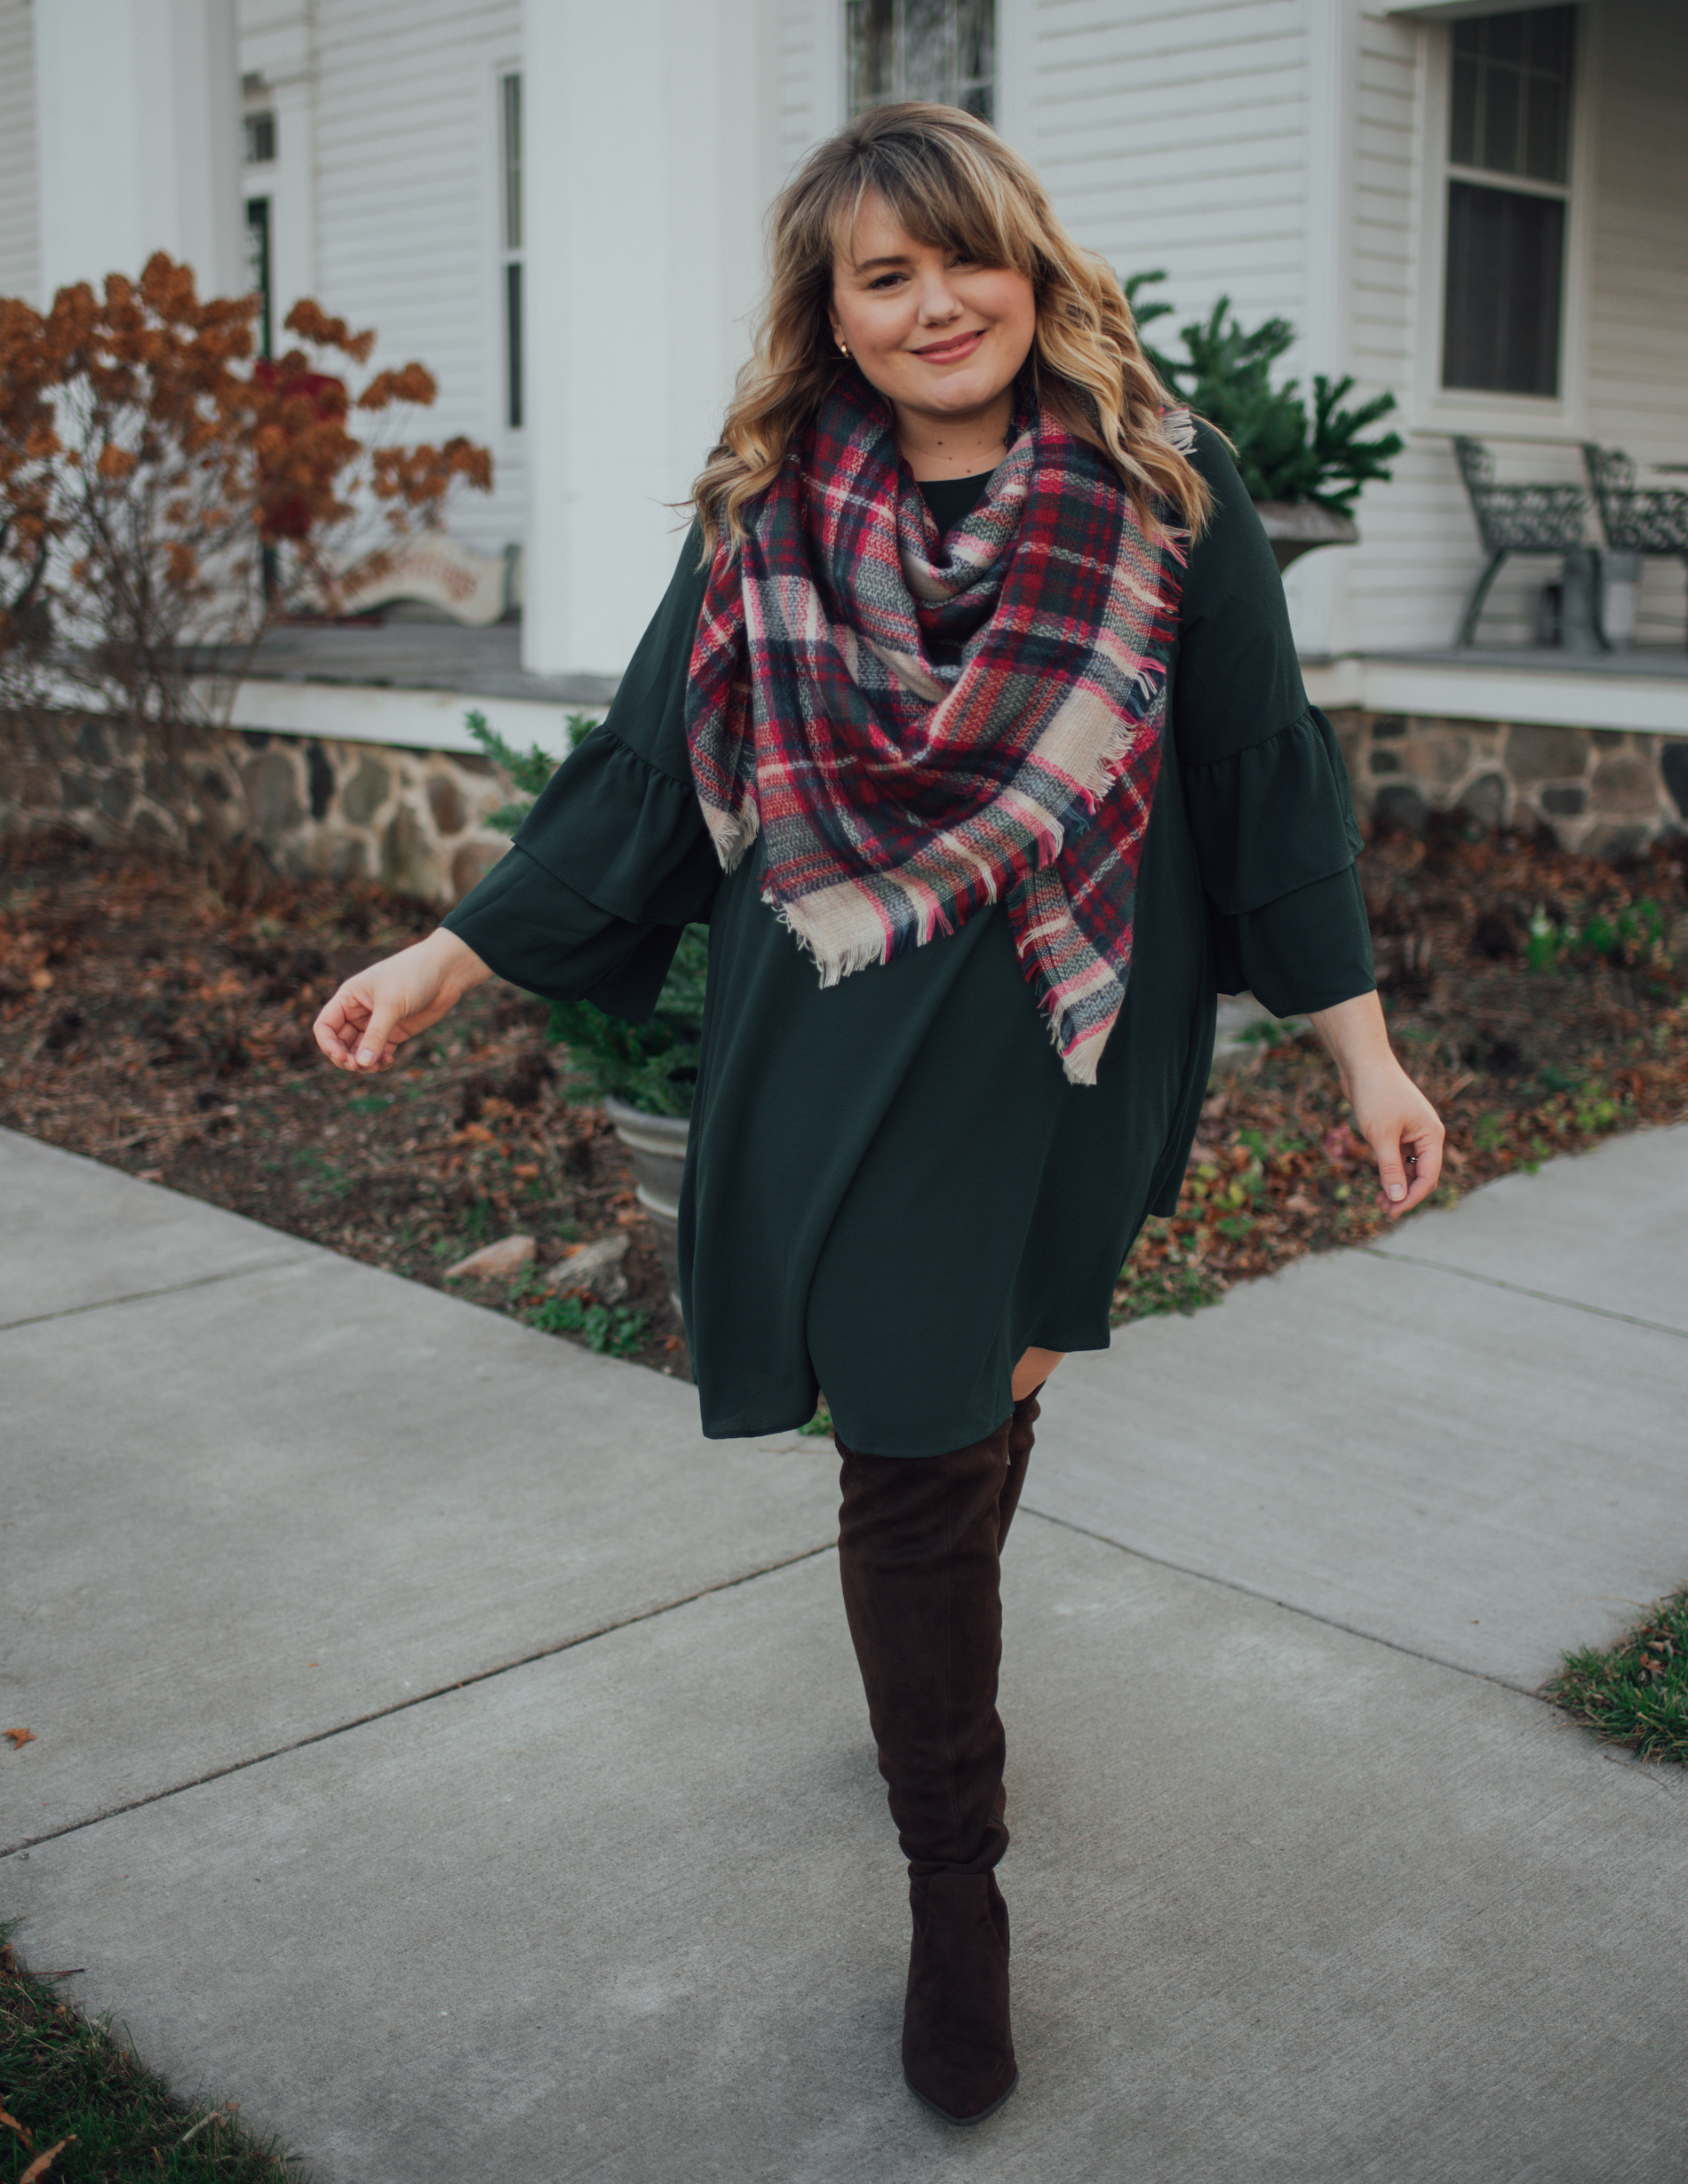 Plus Size Black Friday Sales To Shop. Sharing a round up of plus size retailers and their Black Friday Sales! 